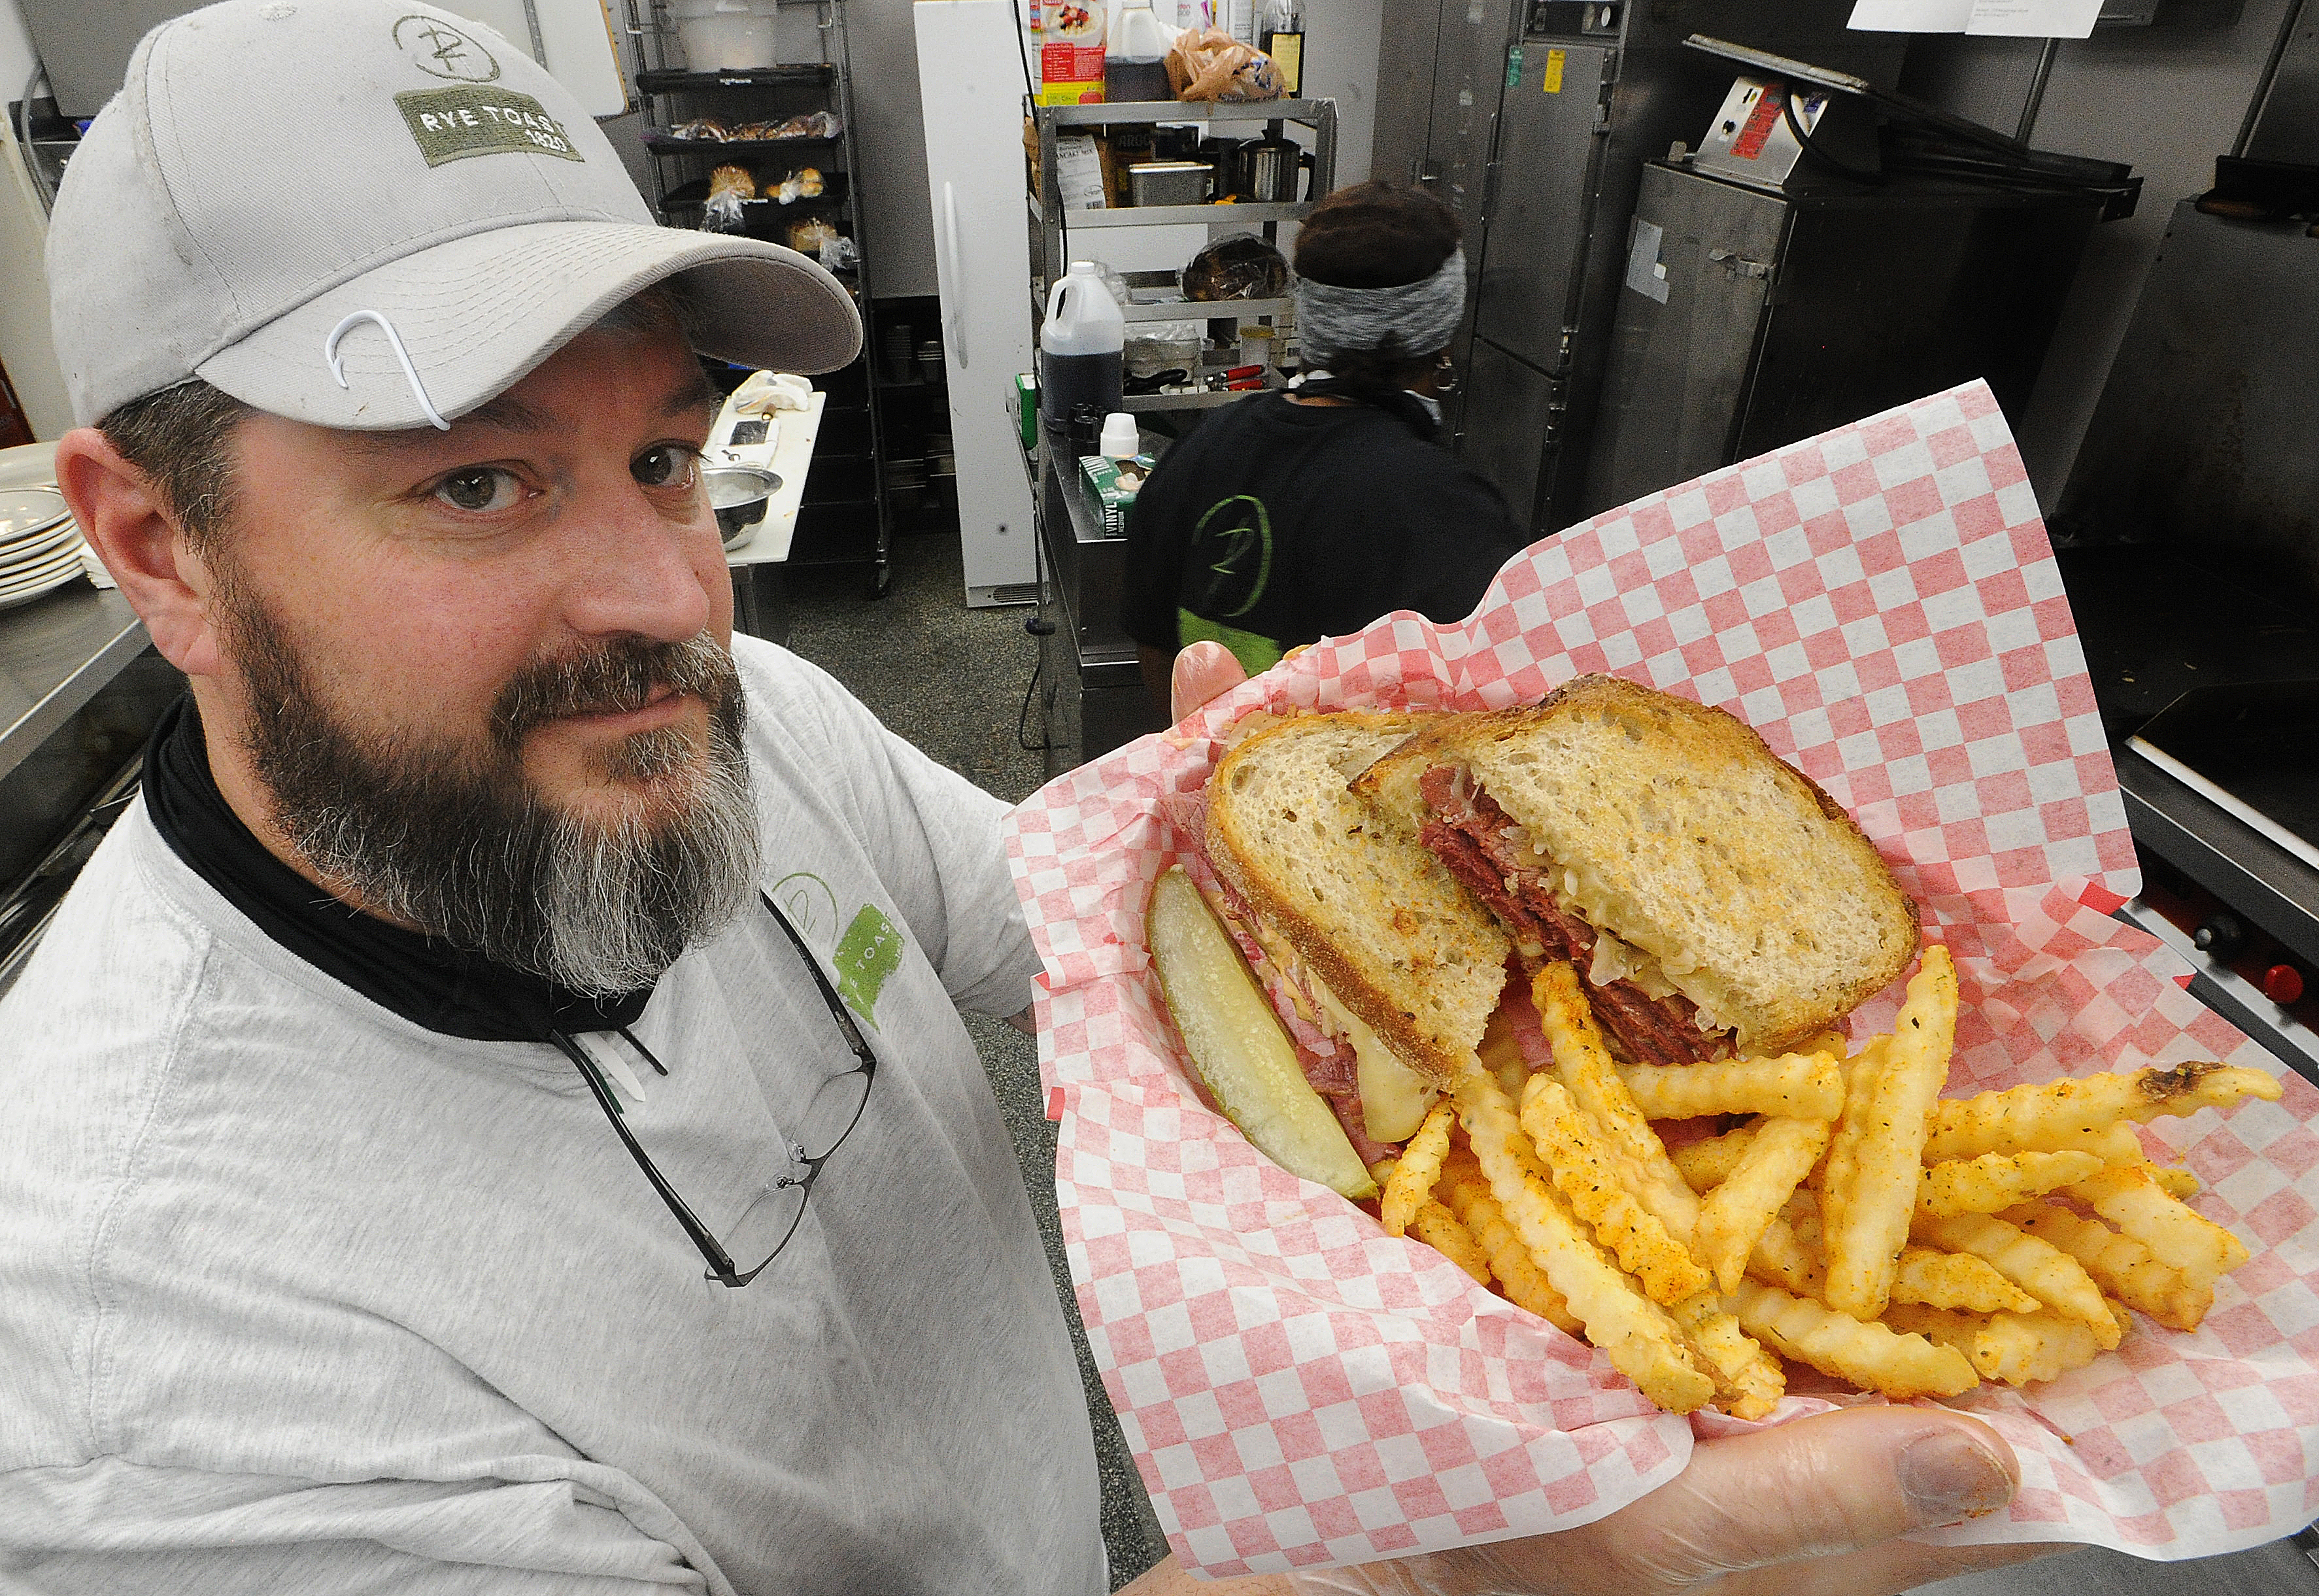 Chef Tom Tiner, owner of the Rye Toast Diner in Miamisburg, shows off his 1\3 lb. sliced corned beef with Swiss cheese, sauerkraut, Thousand Island dressig on griddled rye toast. MARSHALL GORBY\STAFF